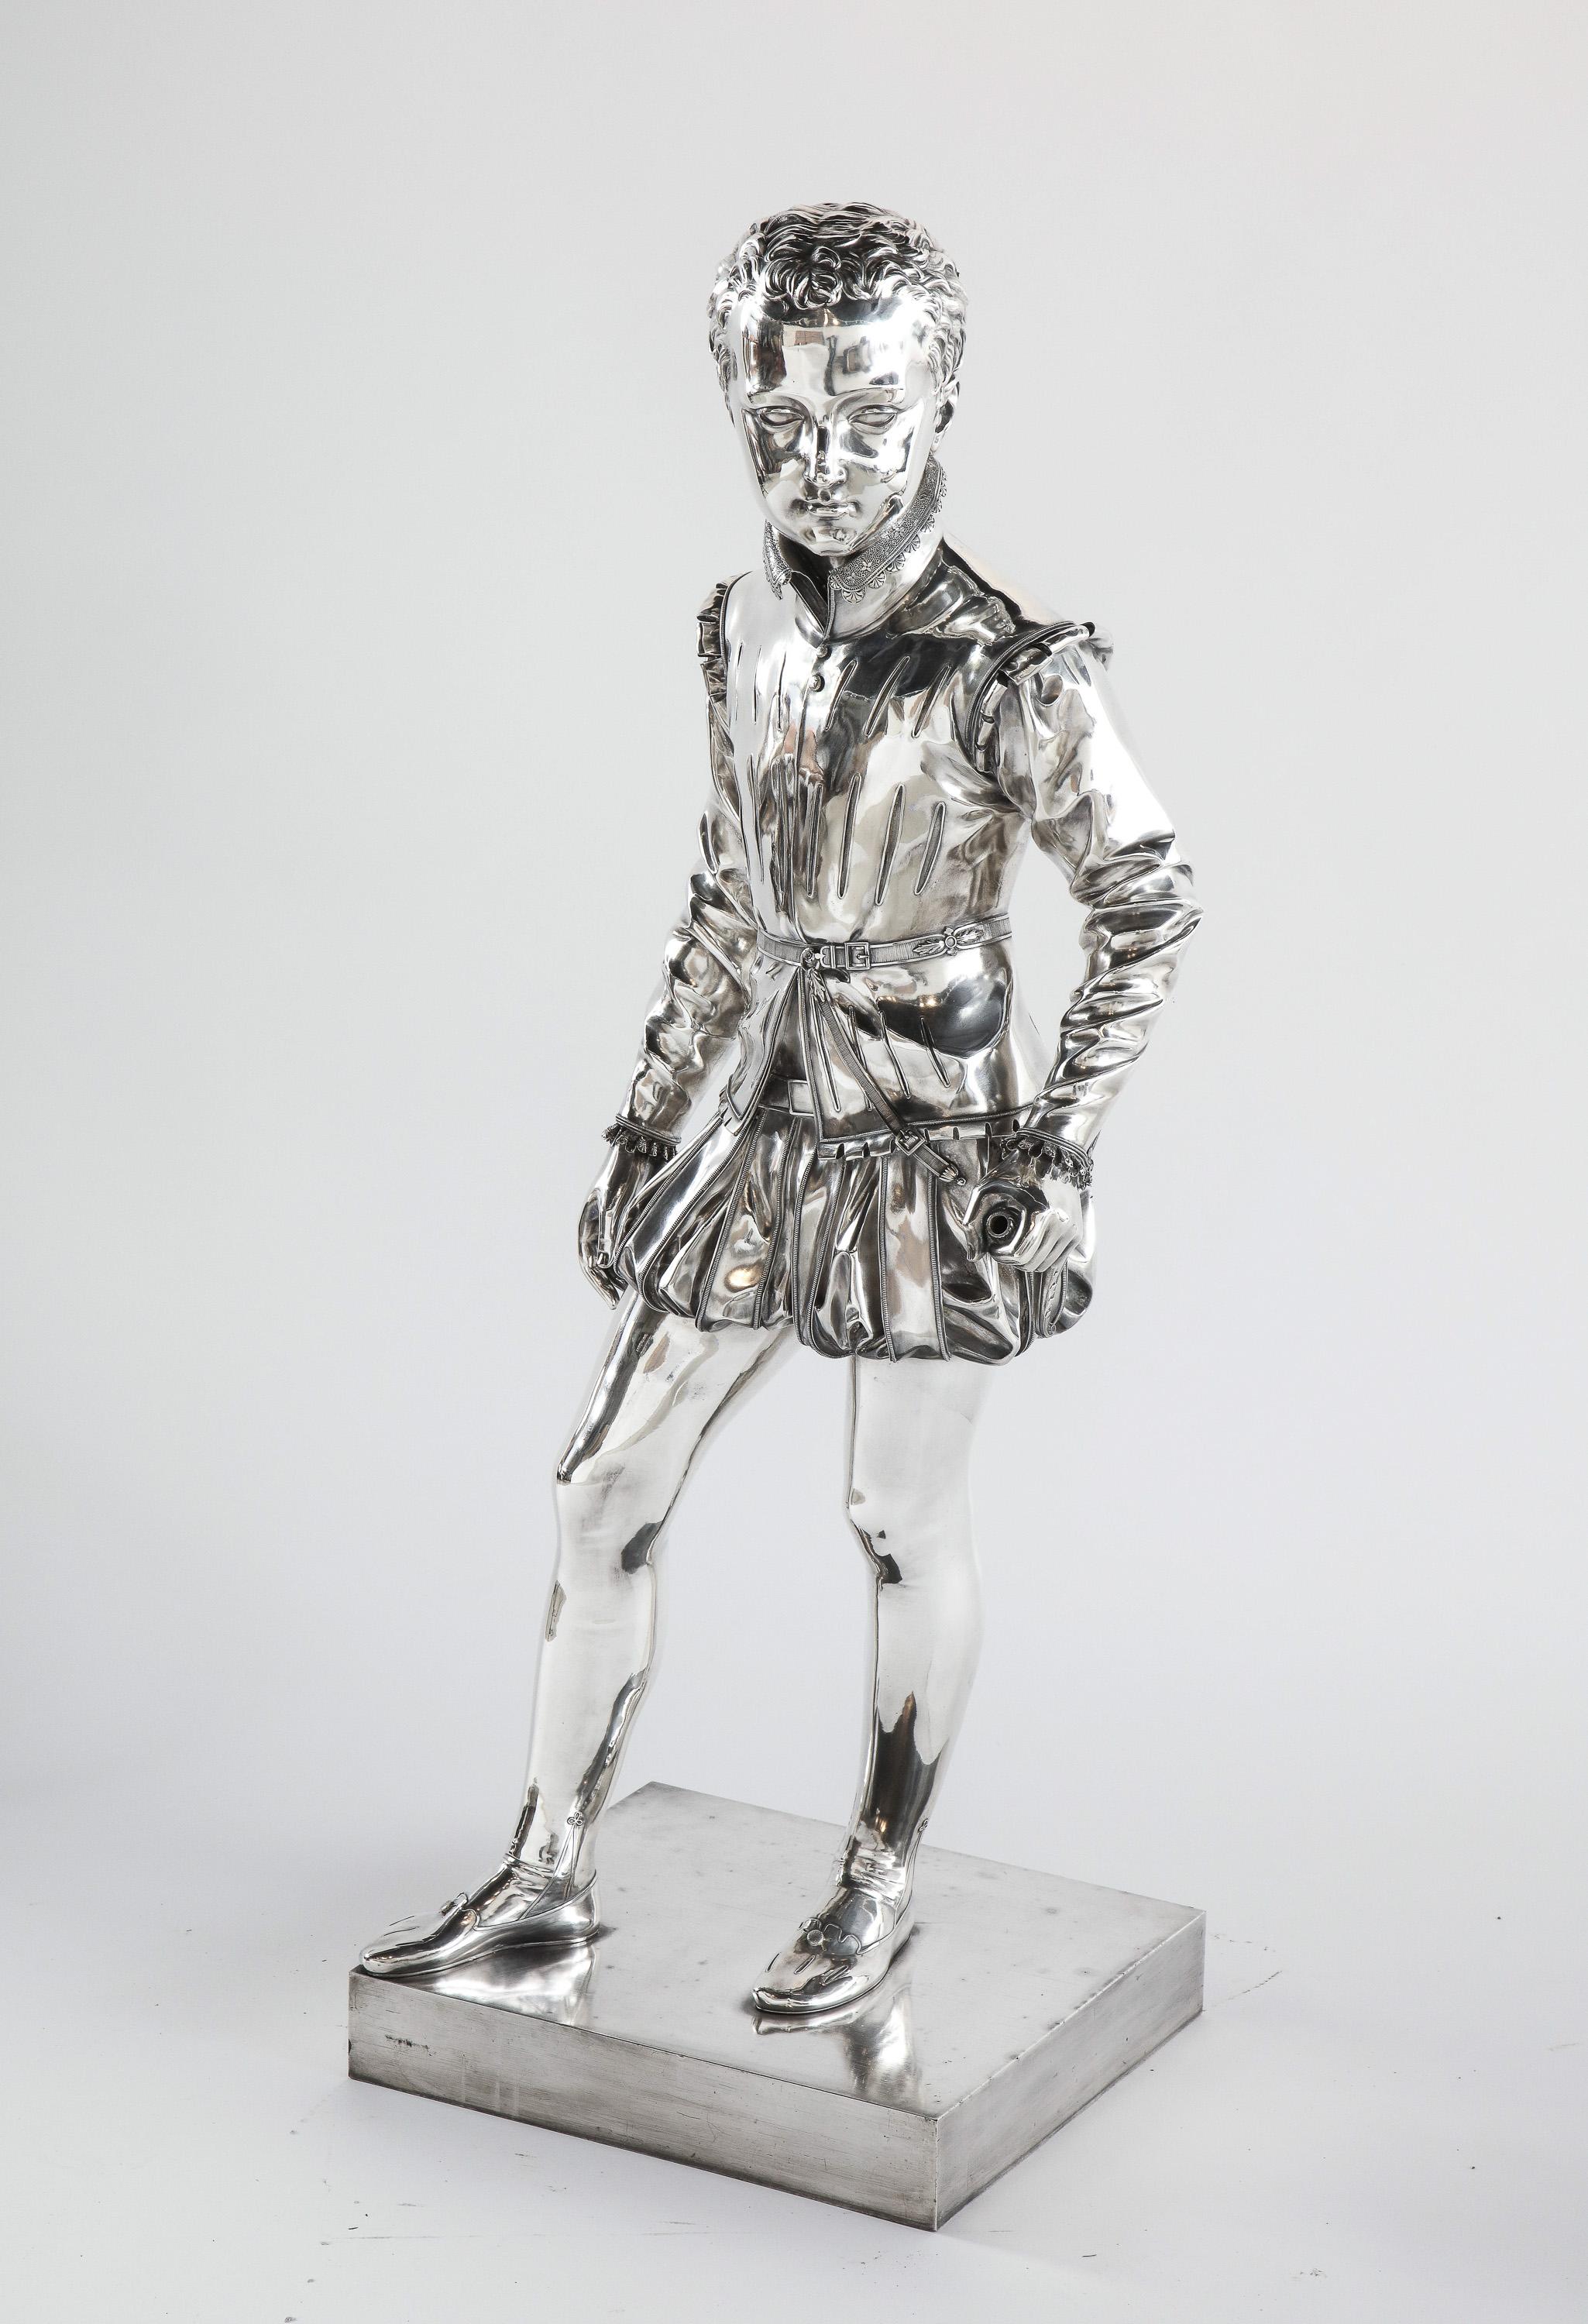 Ferdinand Barbedienne, A life-size silvered bronze sculpture of King Henri IV Enfant As a Child, after Francois-Joseph Bosio, (French, 1768 - 1845), circa 1860.

Foundry mark 